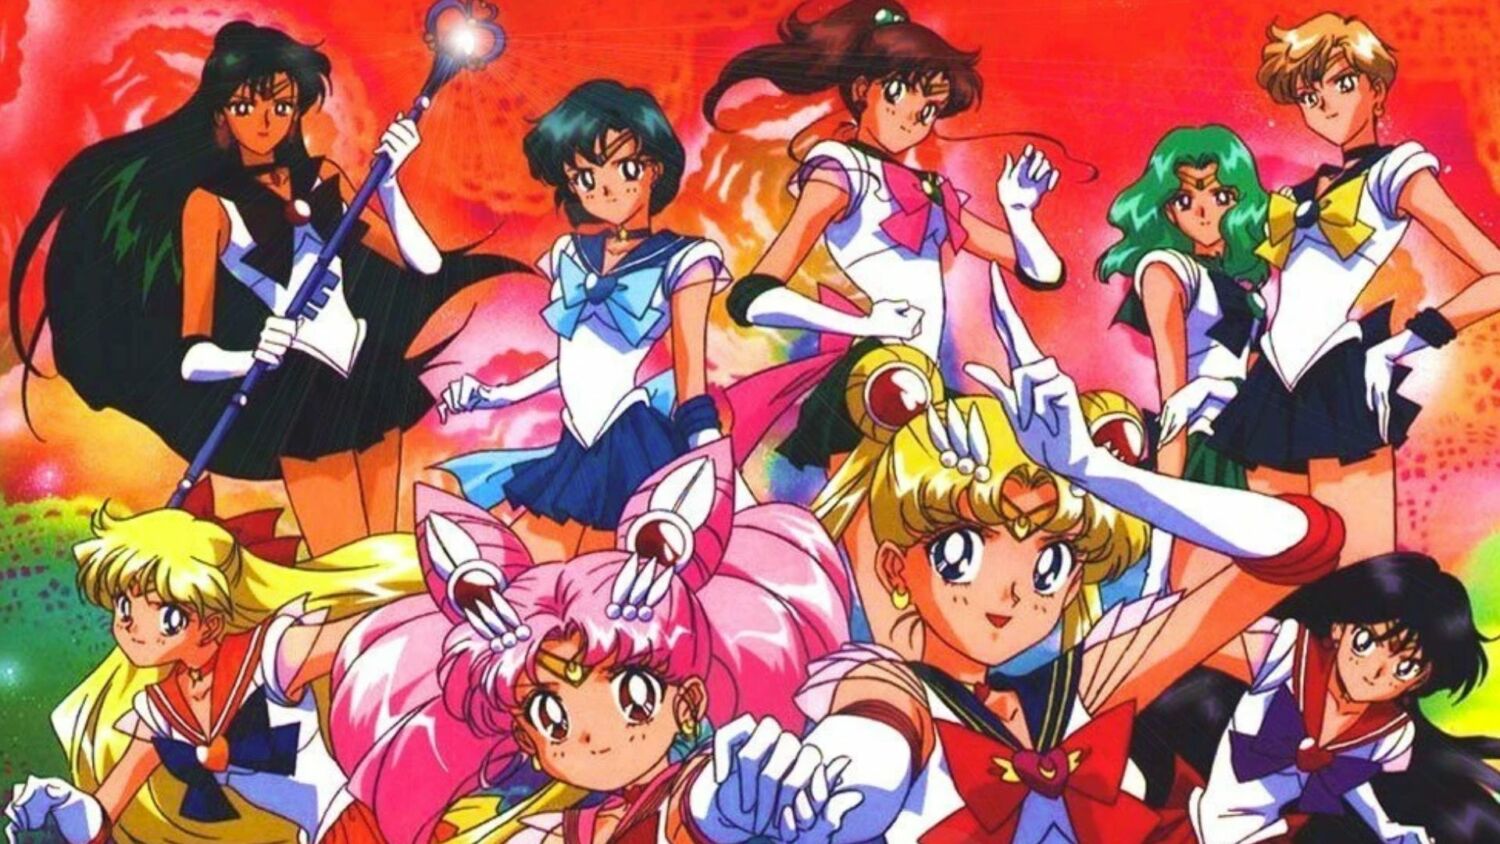 Sailor Moon anime from the '90s now available for free on